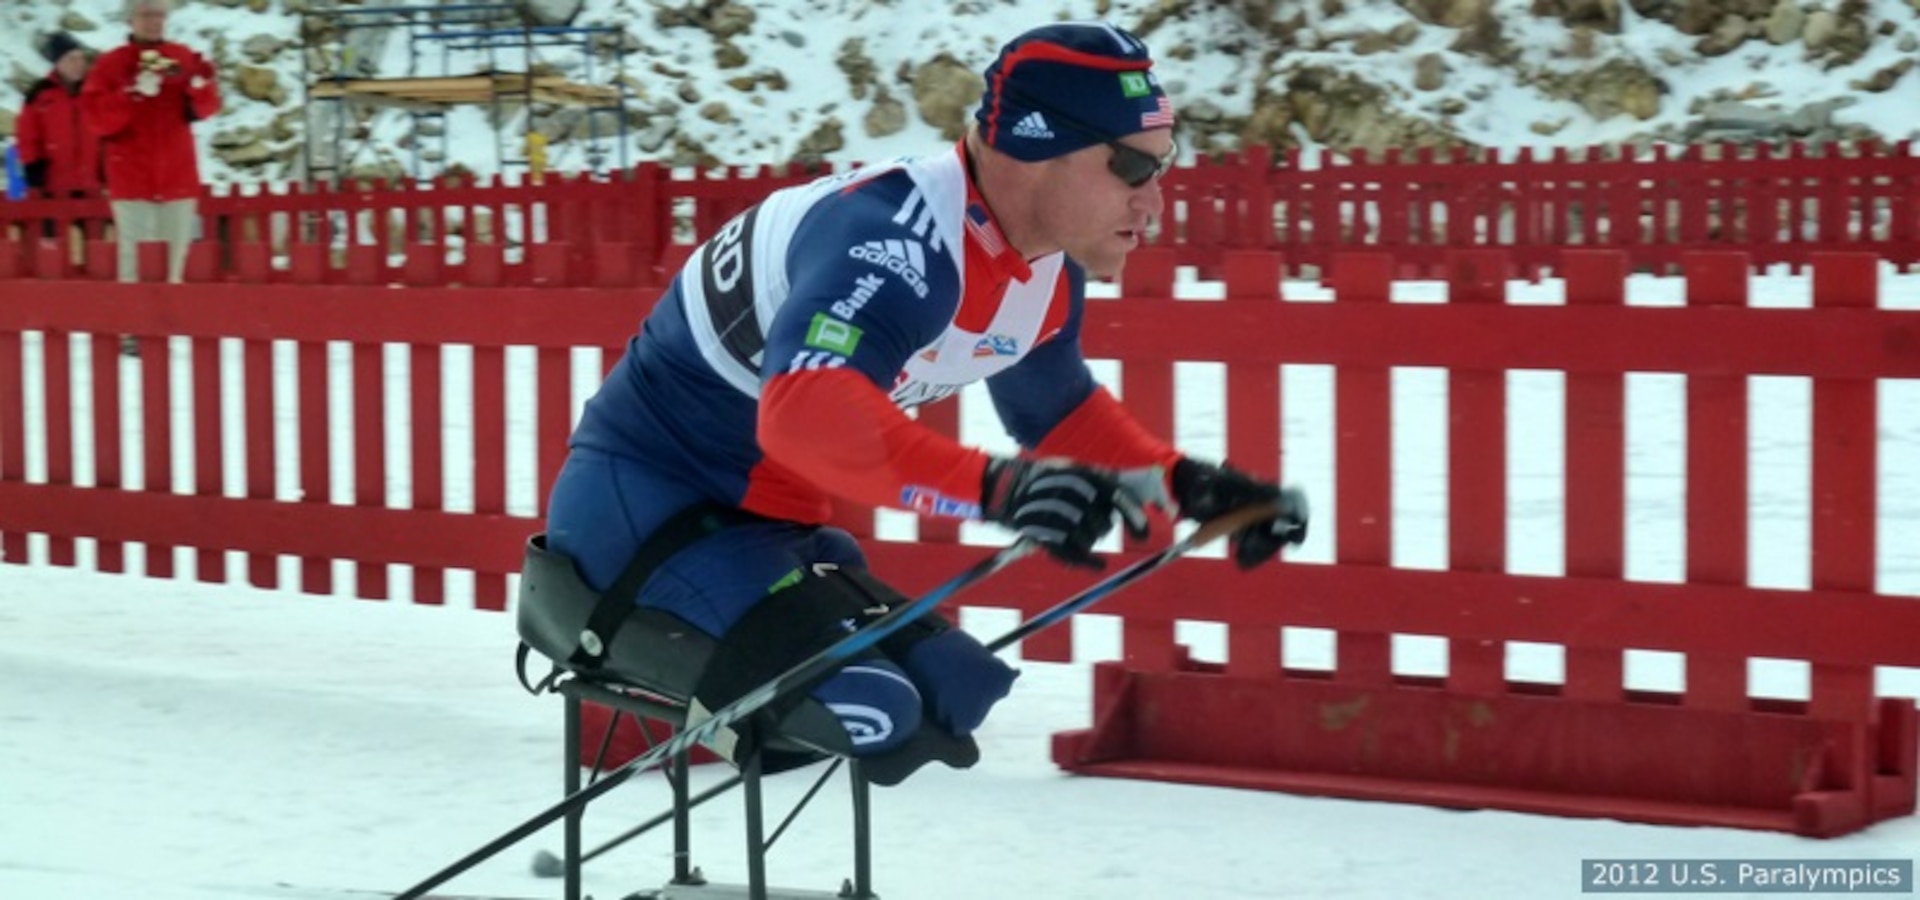 LCDR Dan Cnossen here in 2012, was selected to the U.S. Paralympic Nordic Skiing Team in Biathlon and Cross Country.  Photo by U.S. Paralympics.